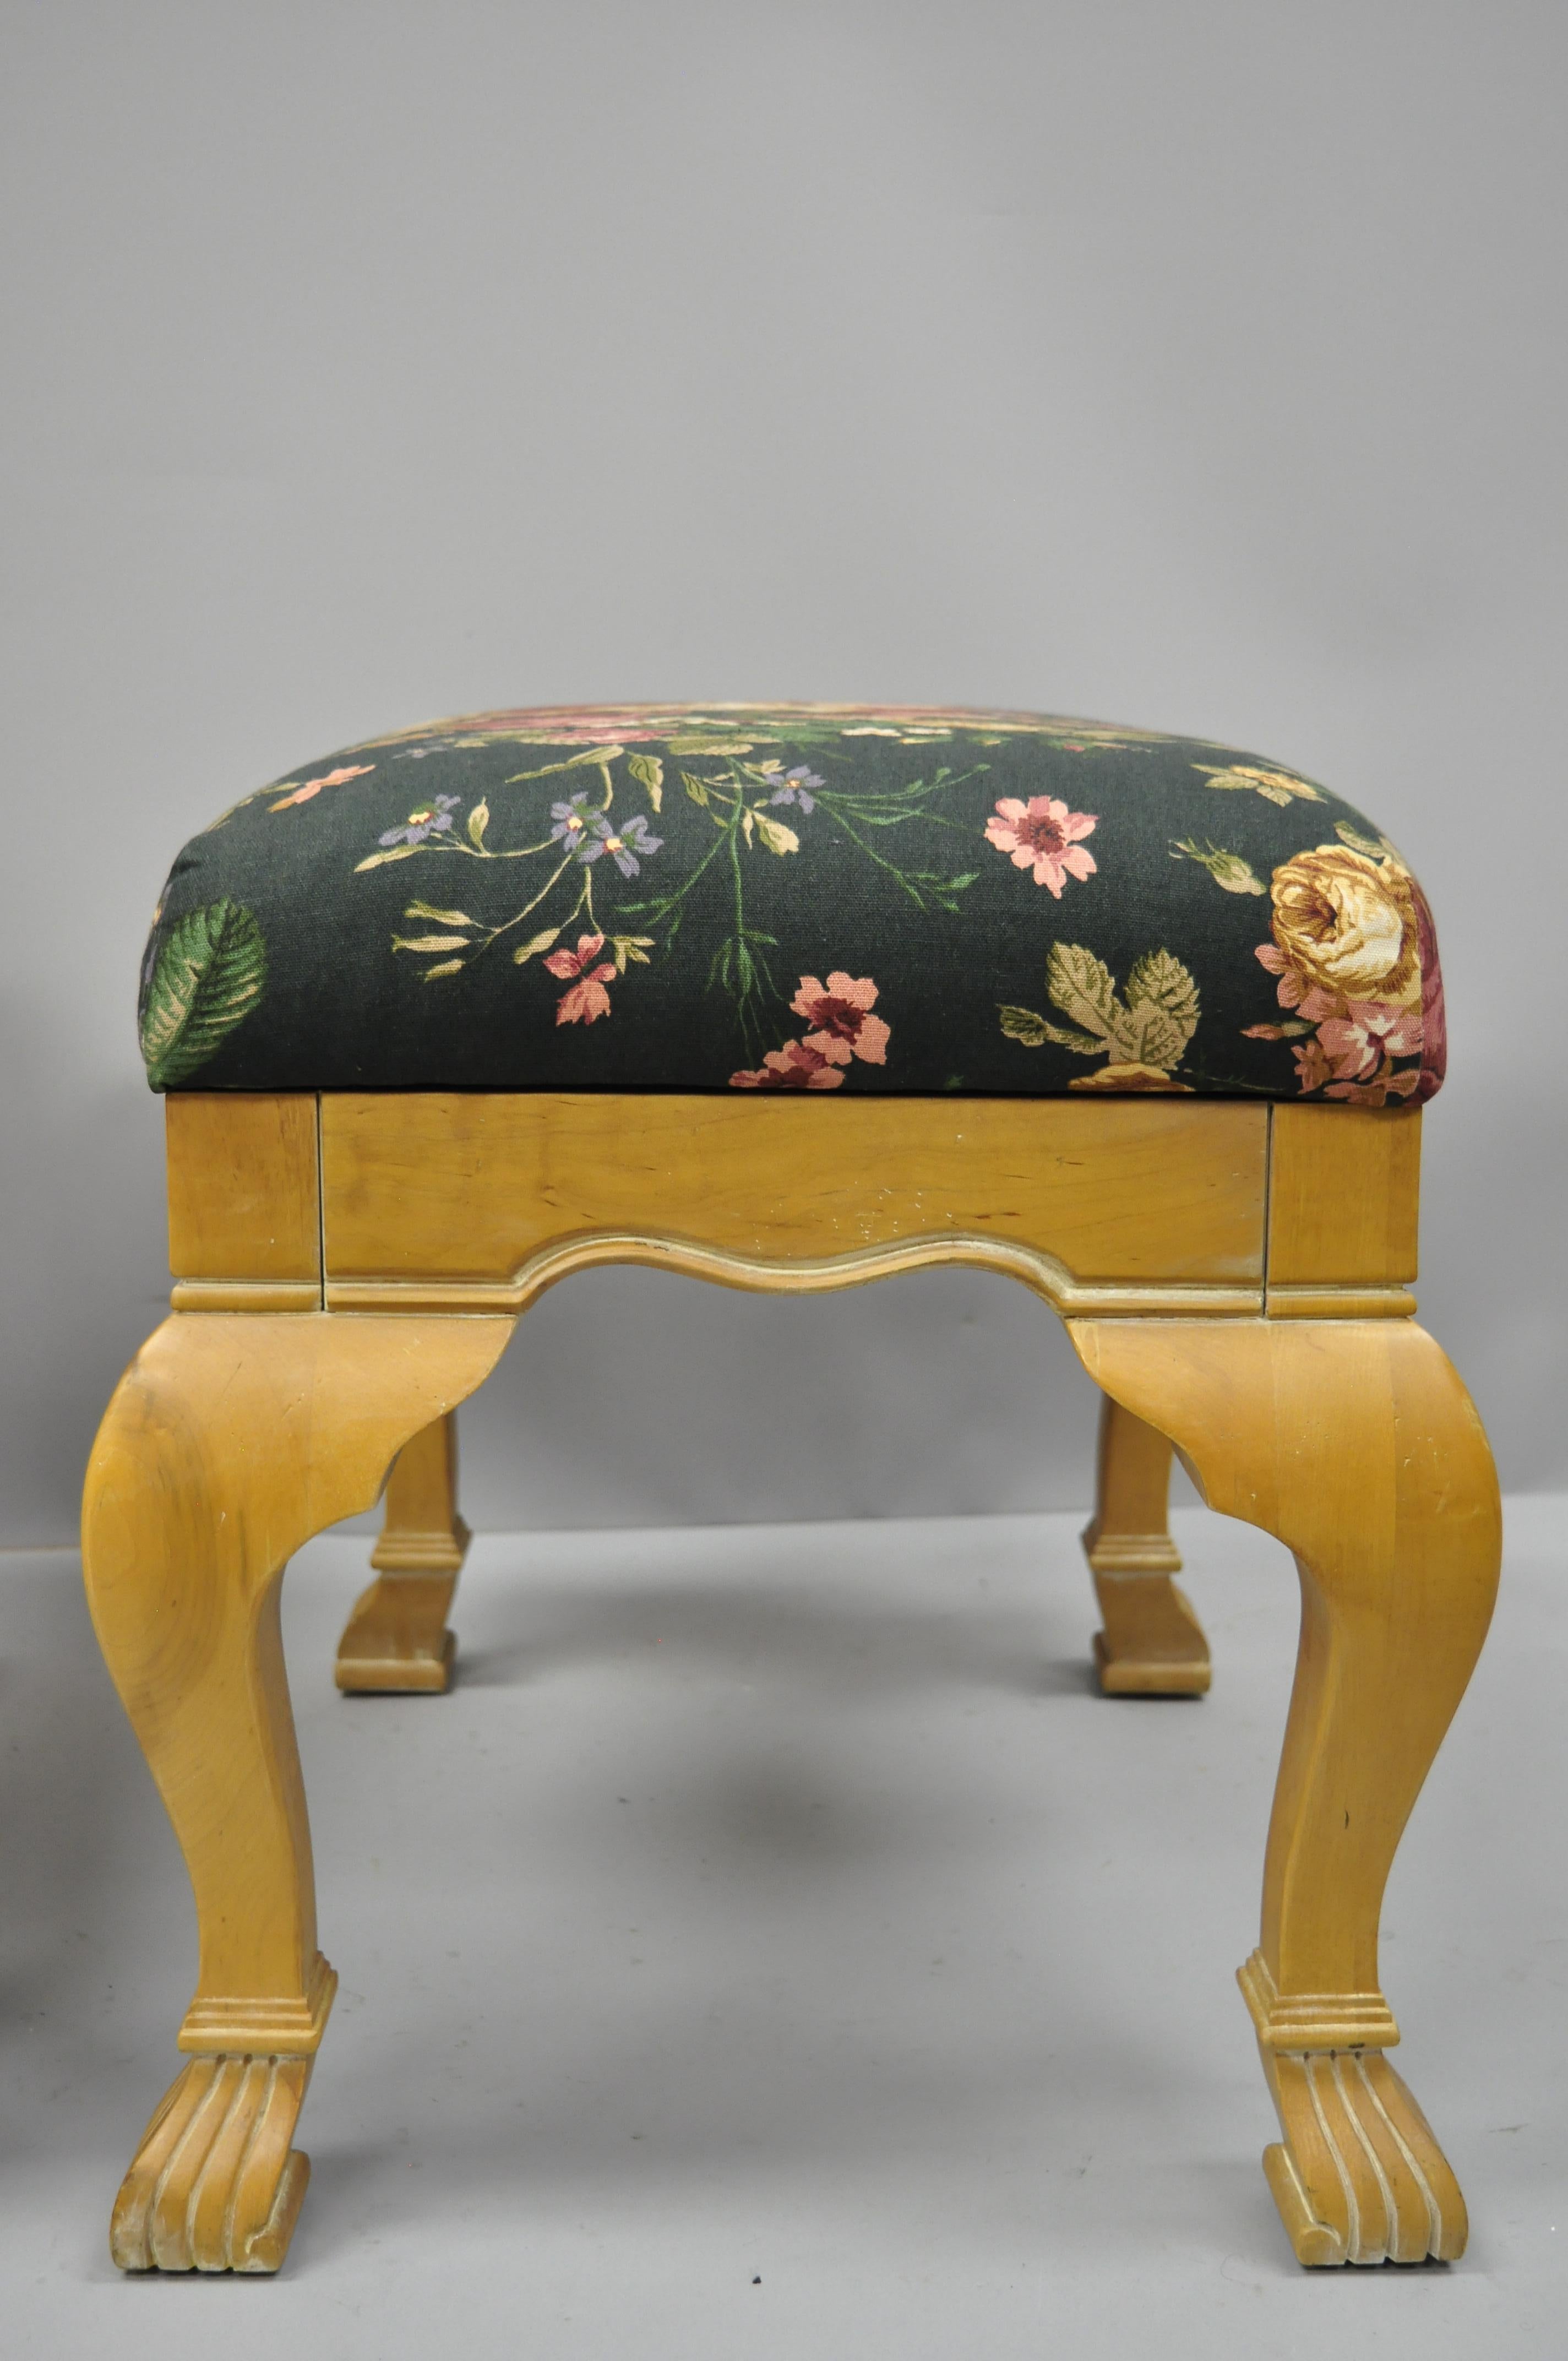 20th Century Pair of Country French Style Cabriole Leg Hoof Foot Upholstered Stools Benches For Sale